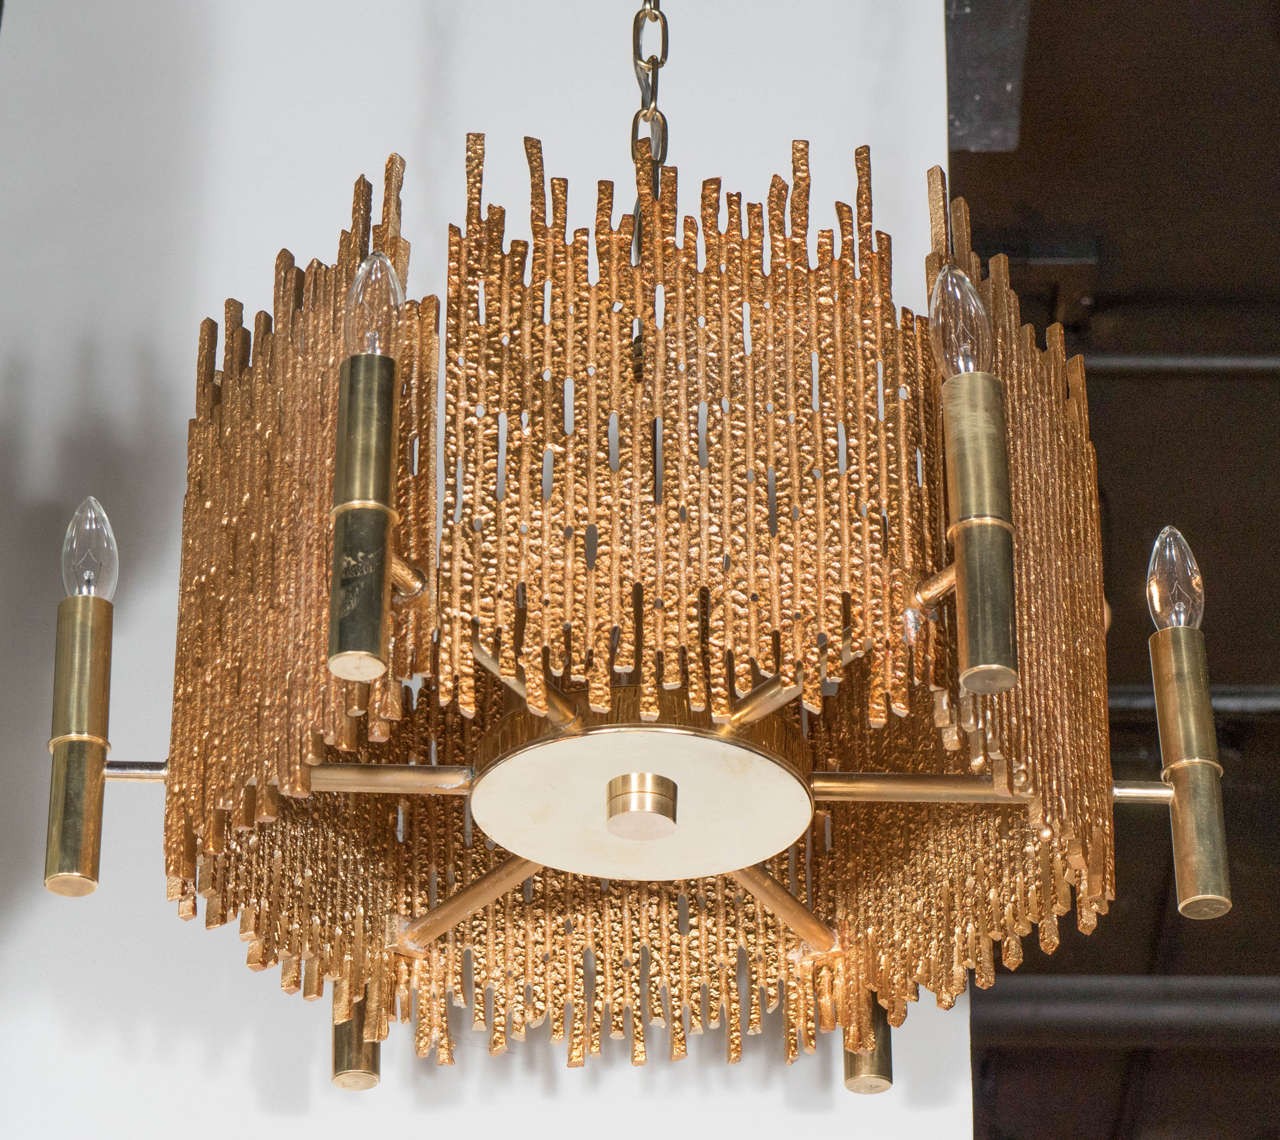 This very sophisticated chandelier features six Brutalist brass panels emanating out from a central stem. It is also fitted with six lights equipped to hold candelabra bulbs. This chandeliers height can be adjusted to suit. This has been completely